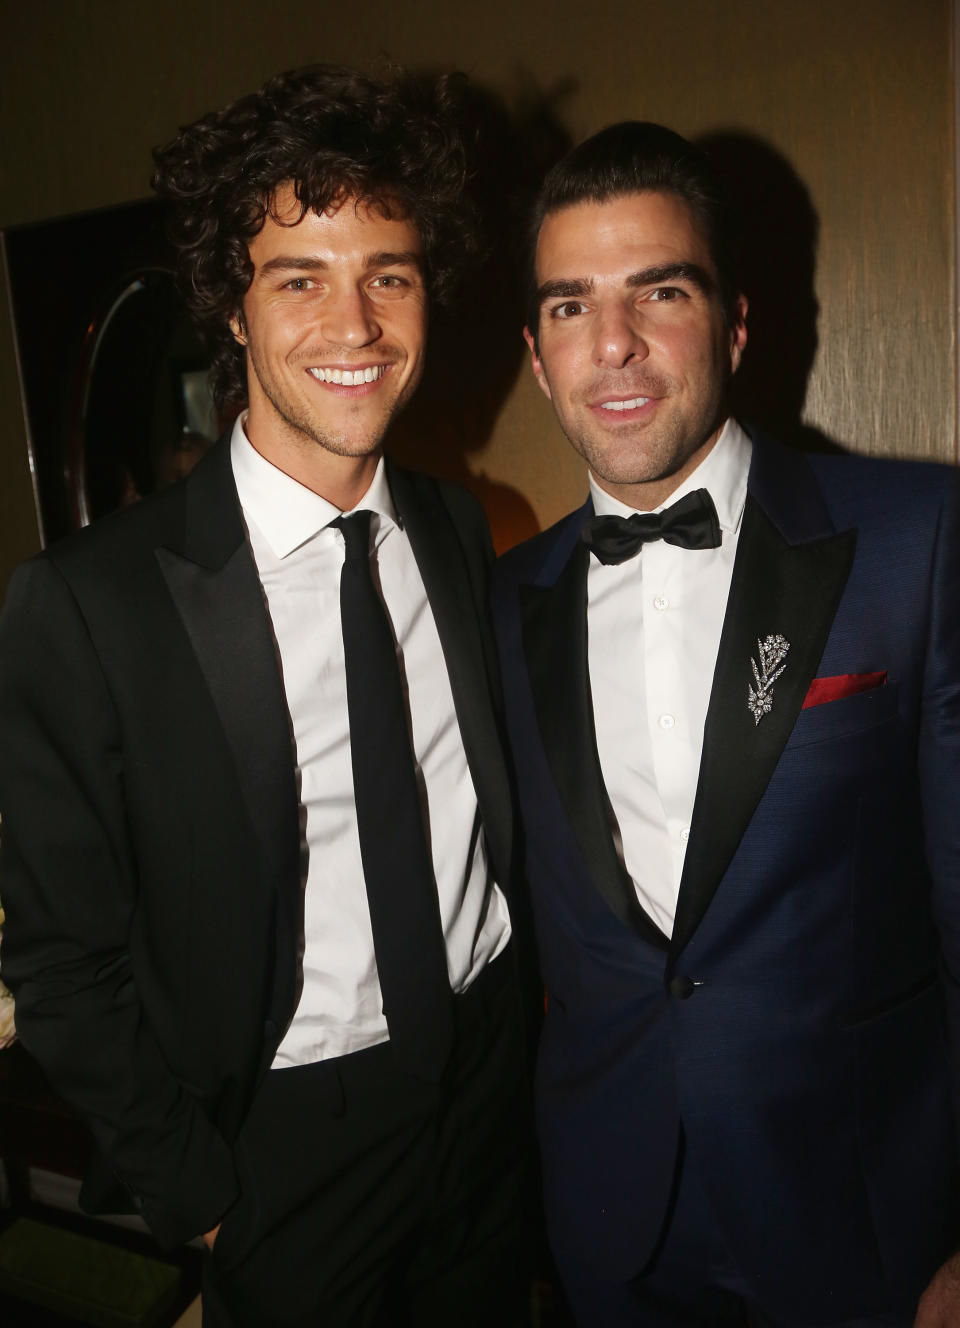 Two smiling men in formal suits, one in black tie and the other in a bow tie with handkerchief